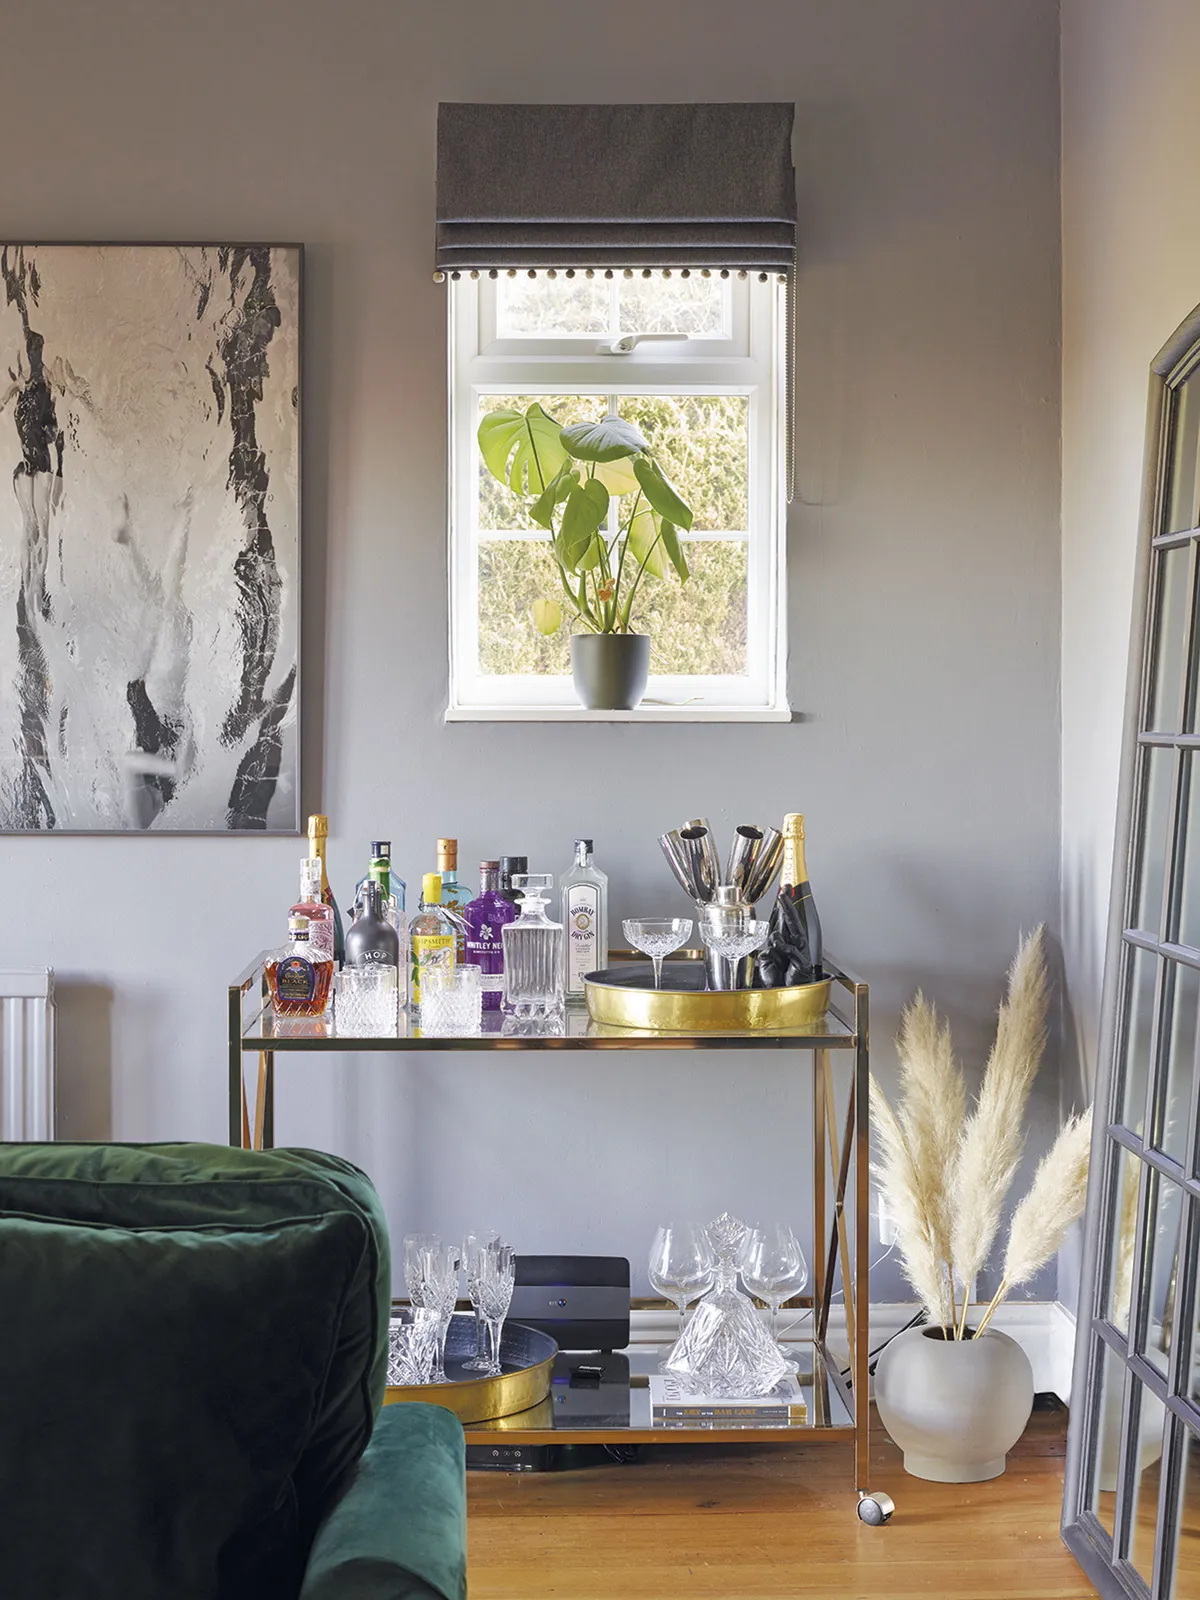 ‘To me a cocktail cabinet has a real sense of nostalgia,’ says Hayley. ‘There’s something so glamorous about a drink before dinner and I had romanticised the idea for ages,’ says Hayley. ‘Eventually I found this cabinet at a second-hand store for £100. The crystal pieces are on loan from Paul’s mum and dad’